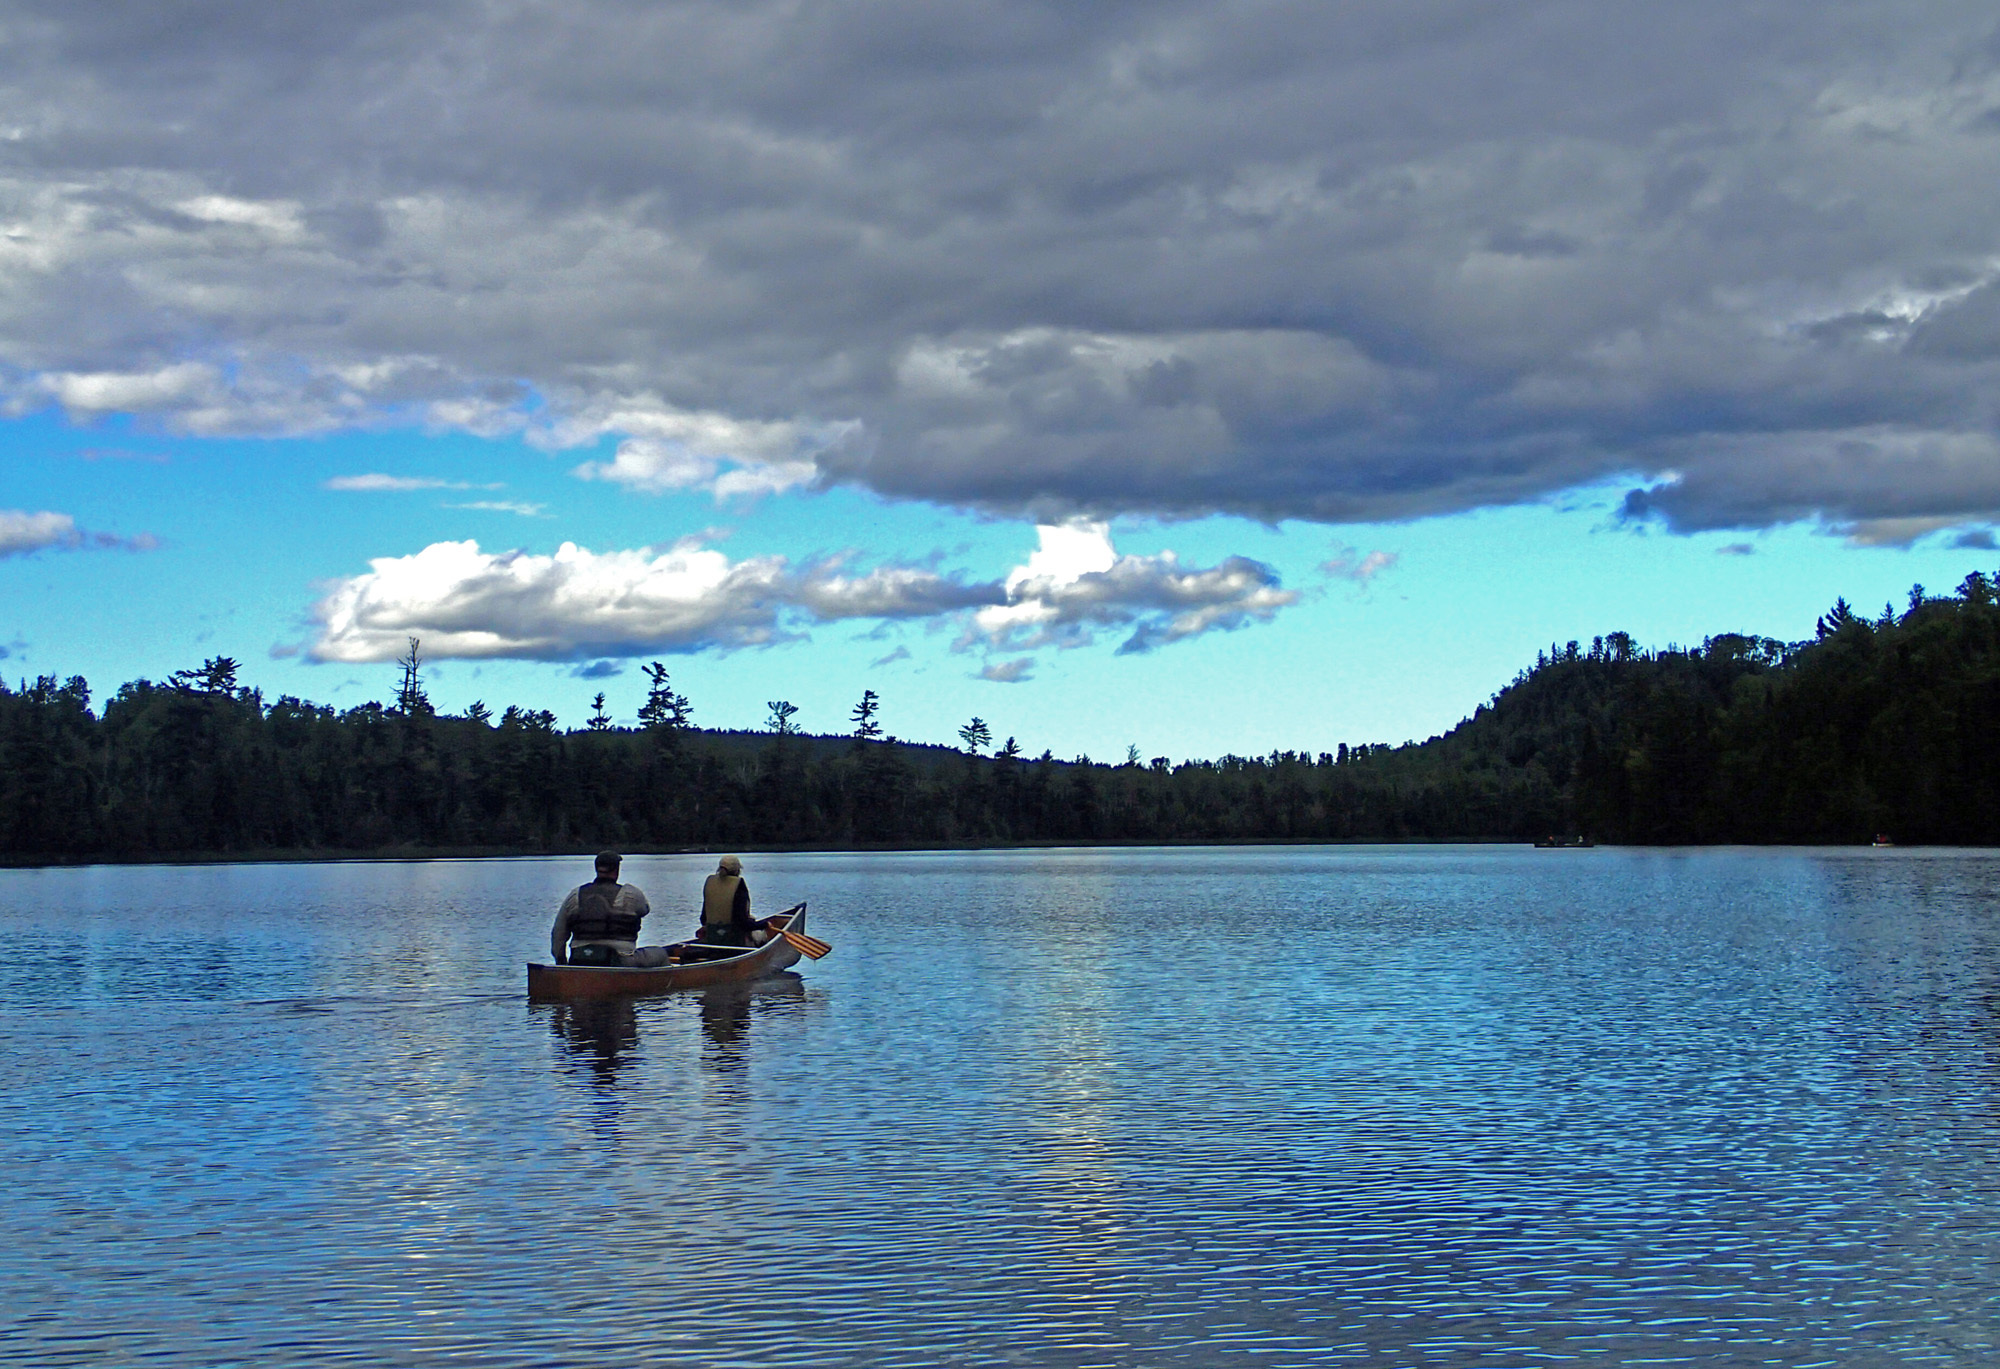 two people in a canoe paddle on a lake with forest in the background